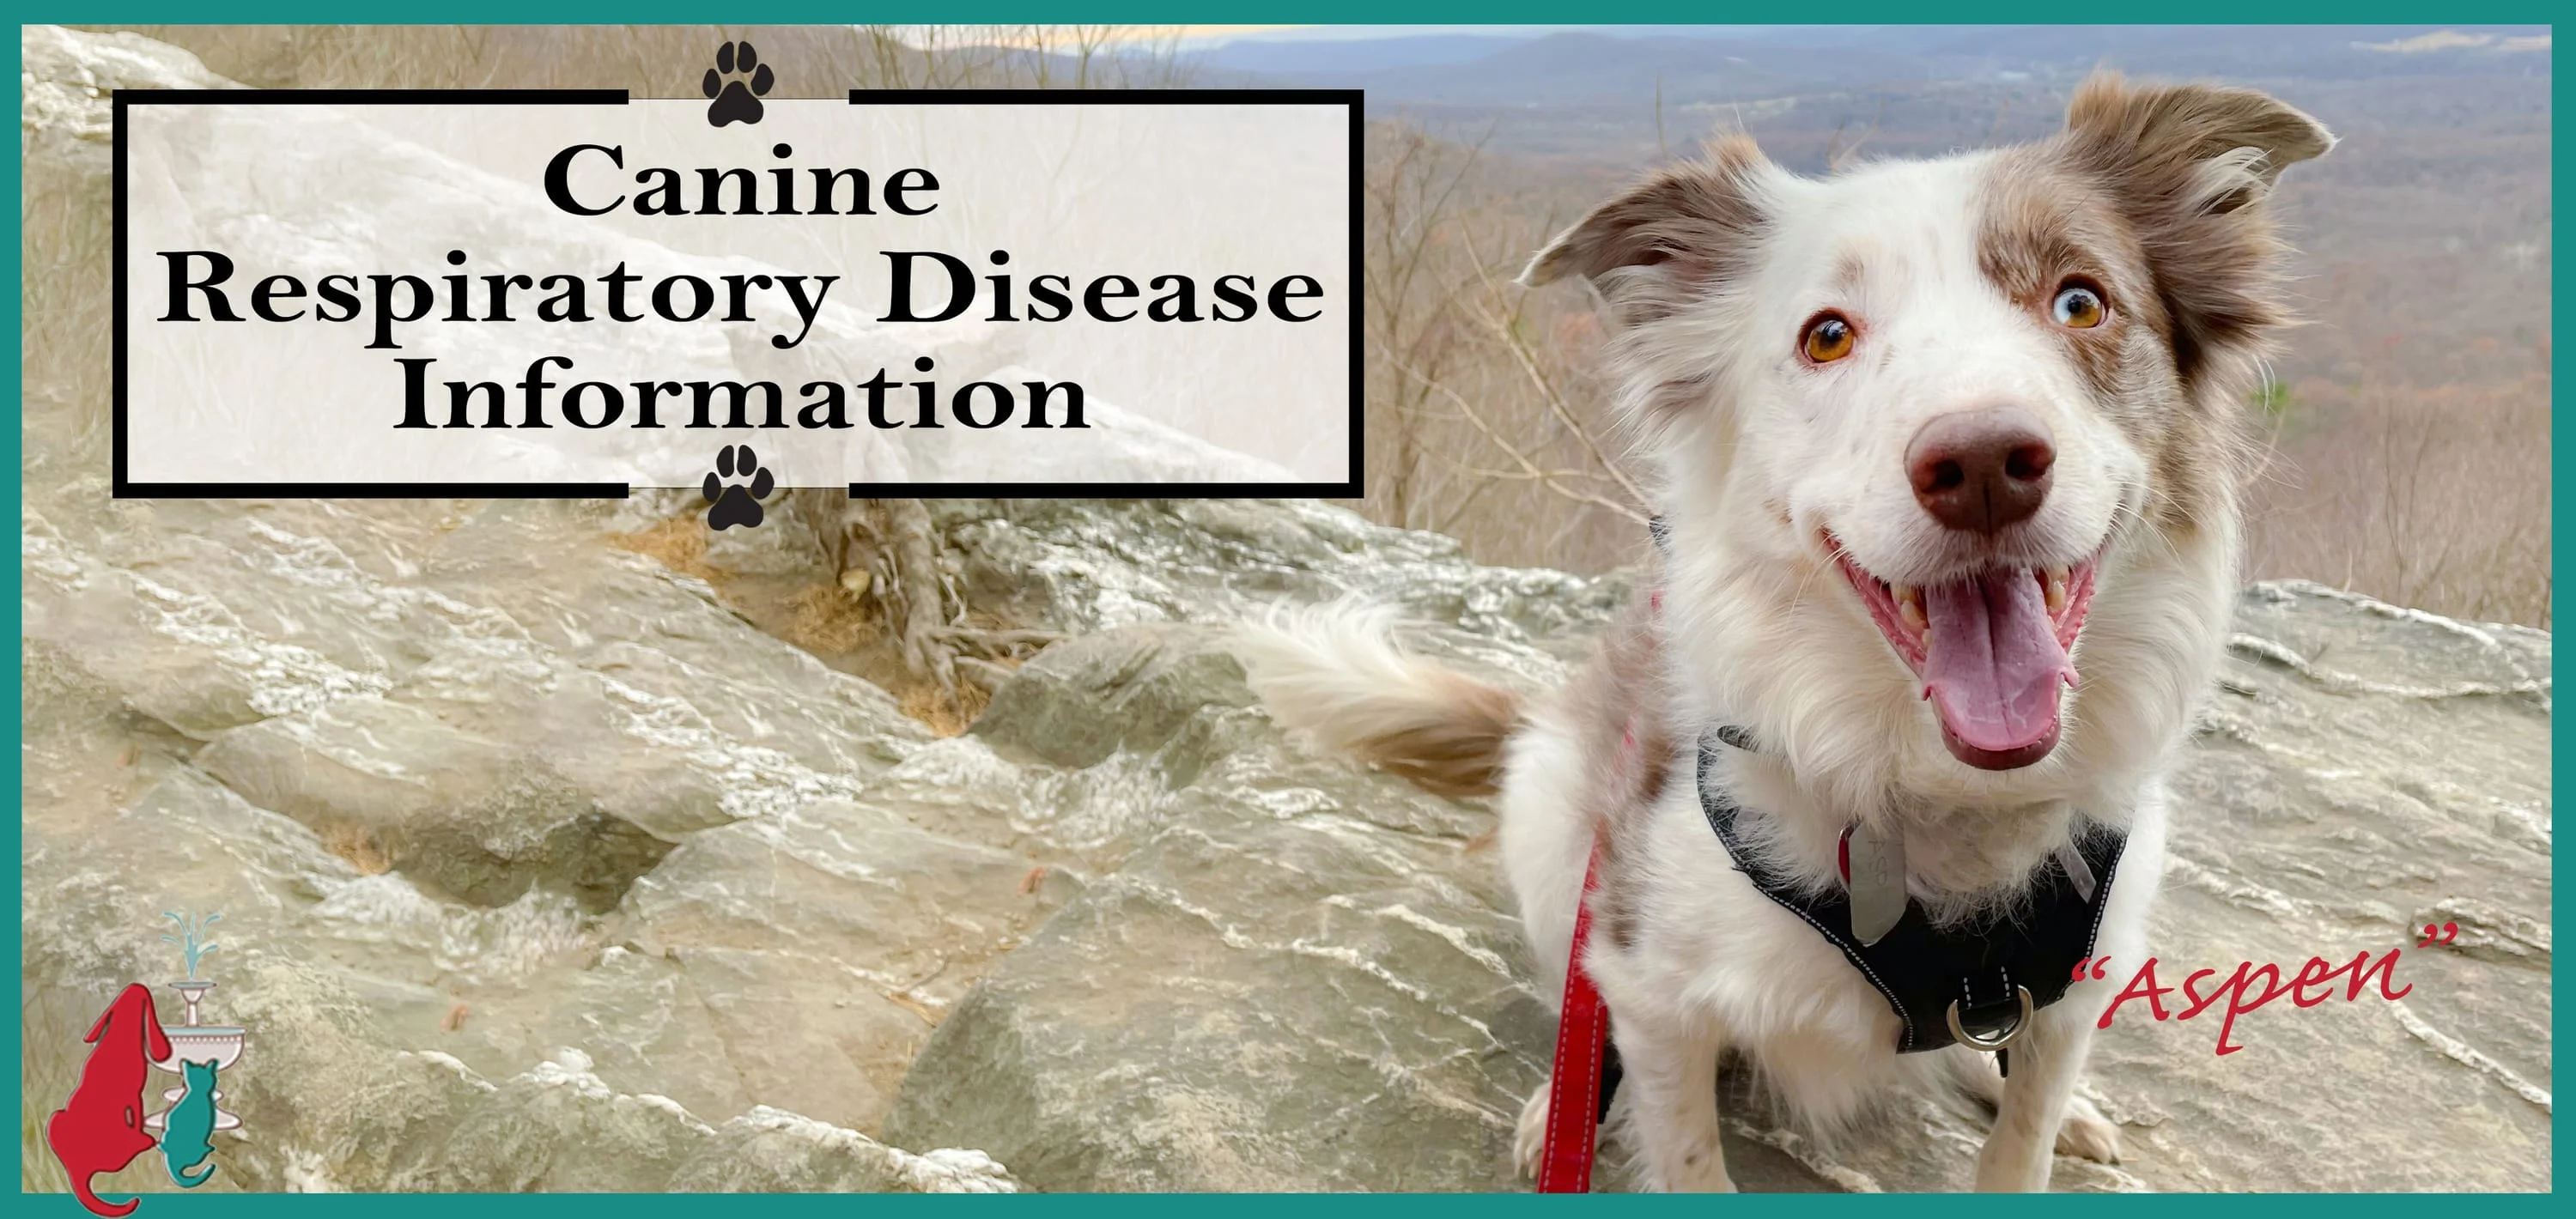 Canine Upper Respiratory Disease Outbreak Information